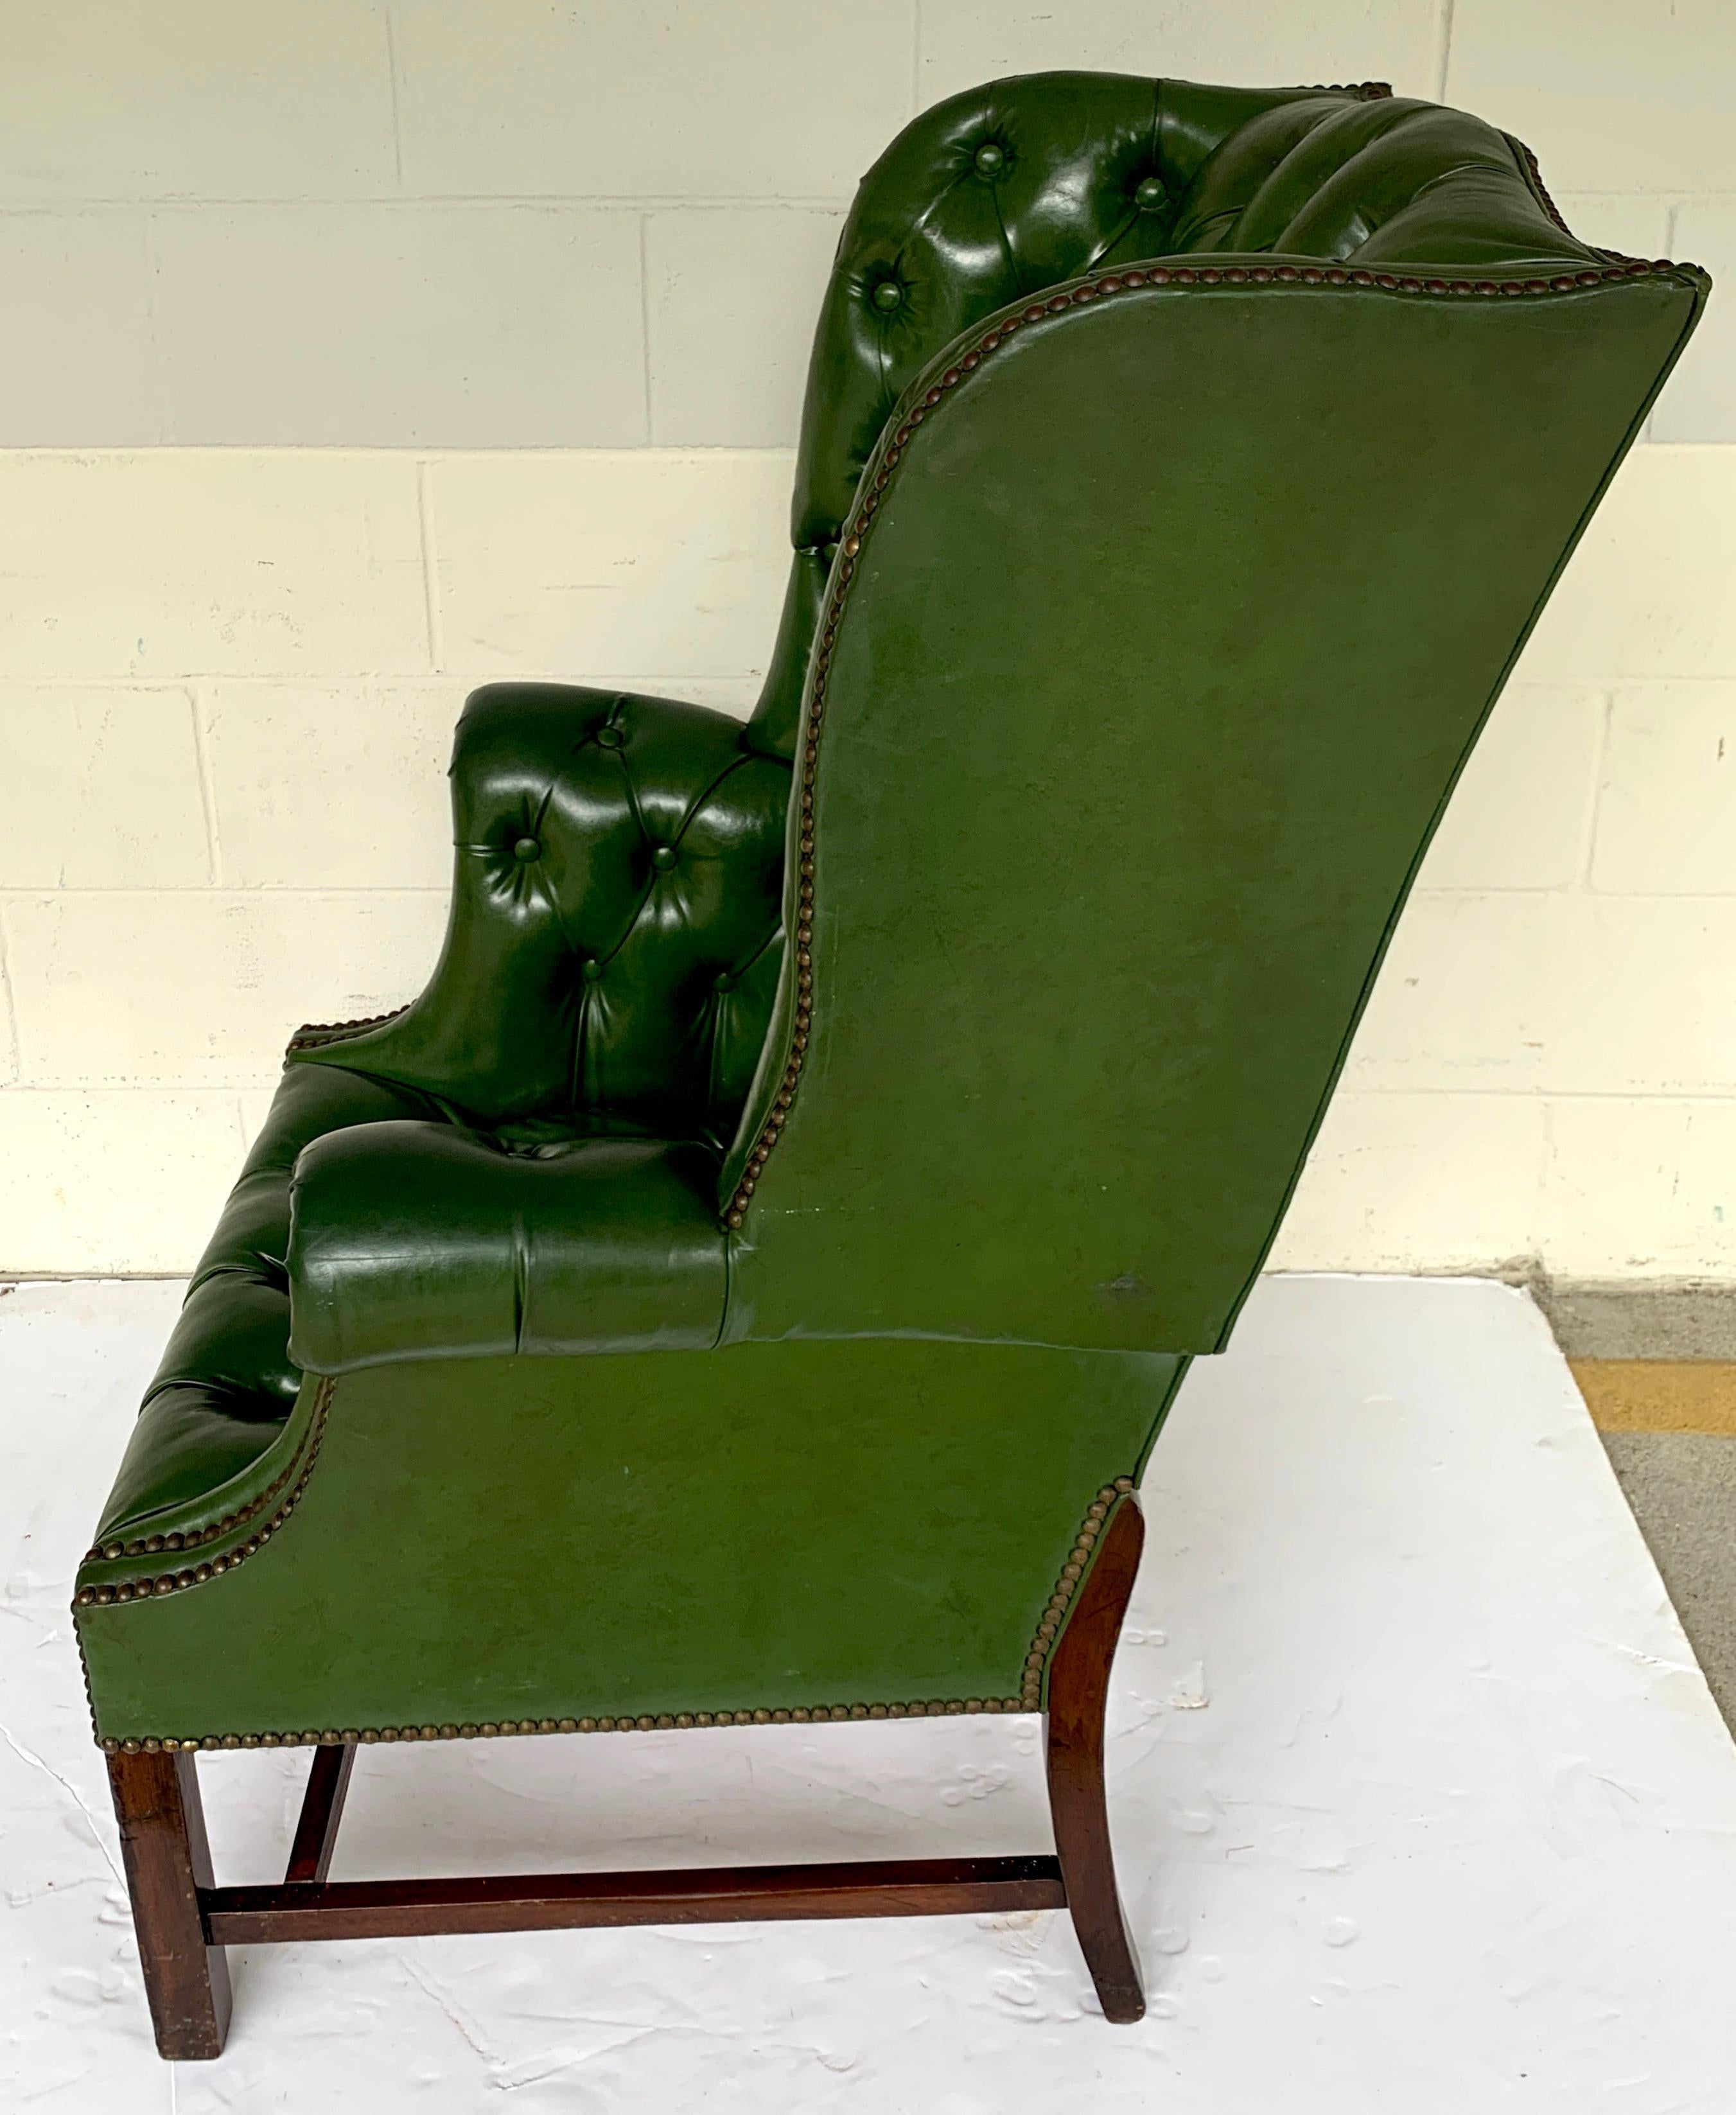 Exquisite George III Mahogany Green Leather Chesterfield Wing Chair 1